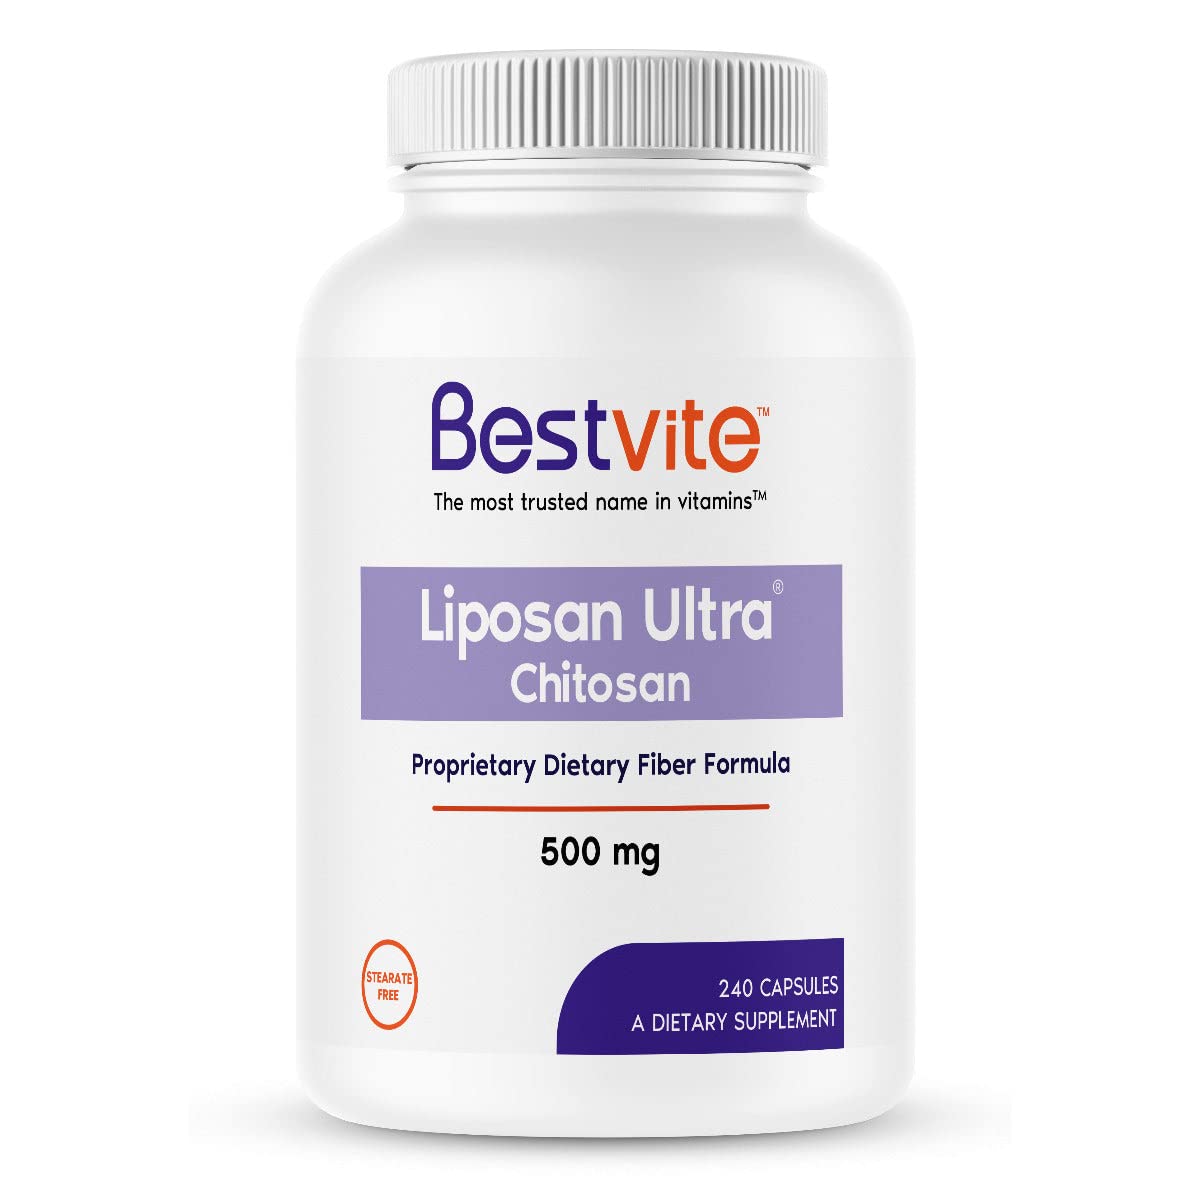 Book Cover BESTVITE Liposan Ultra Chitosan 500mg (240 Capsules) - Patented Faster Acting Than Regular Chitosan - No Stearates - No Fillers 240 Count (Pack of 1)